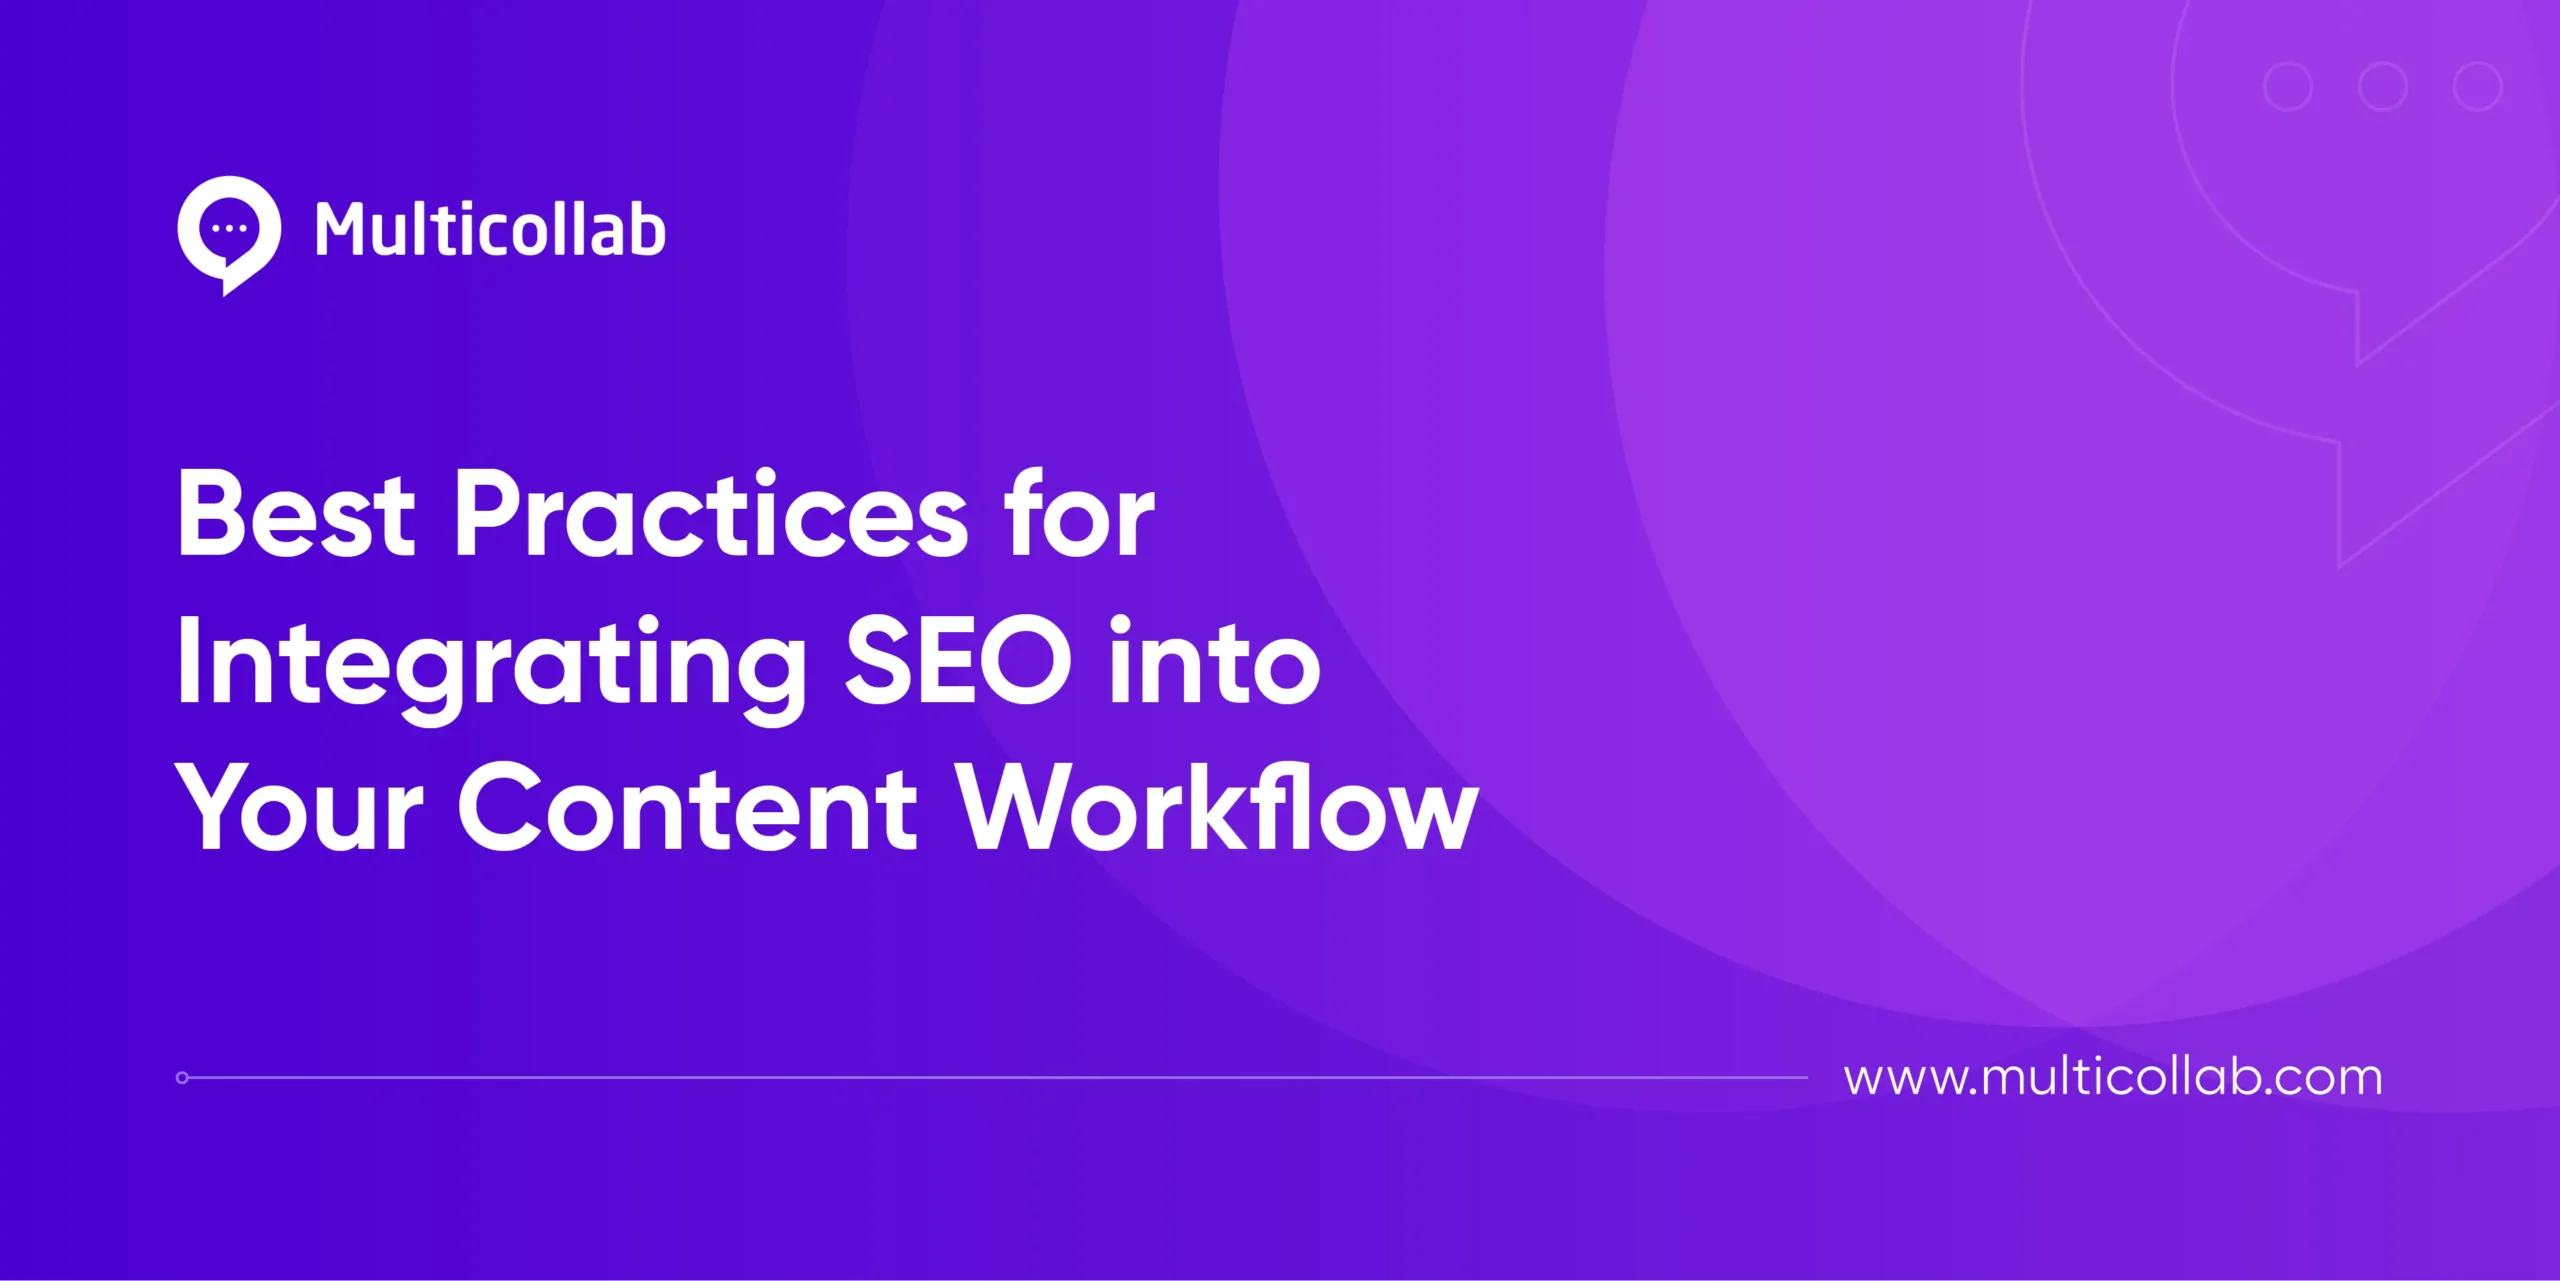 integrate seo into content workflow graphic